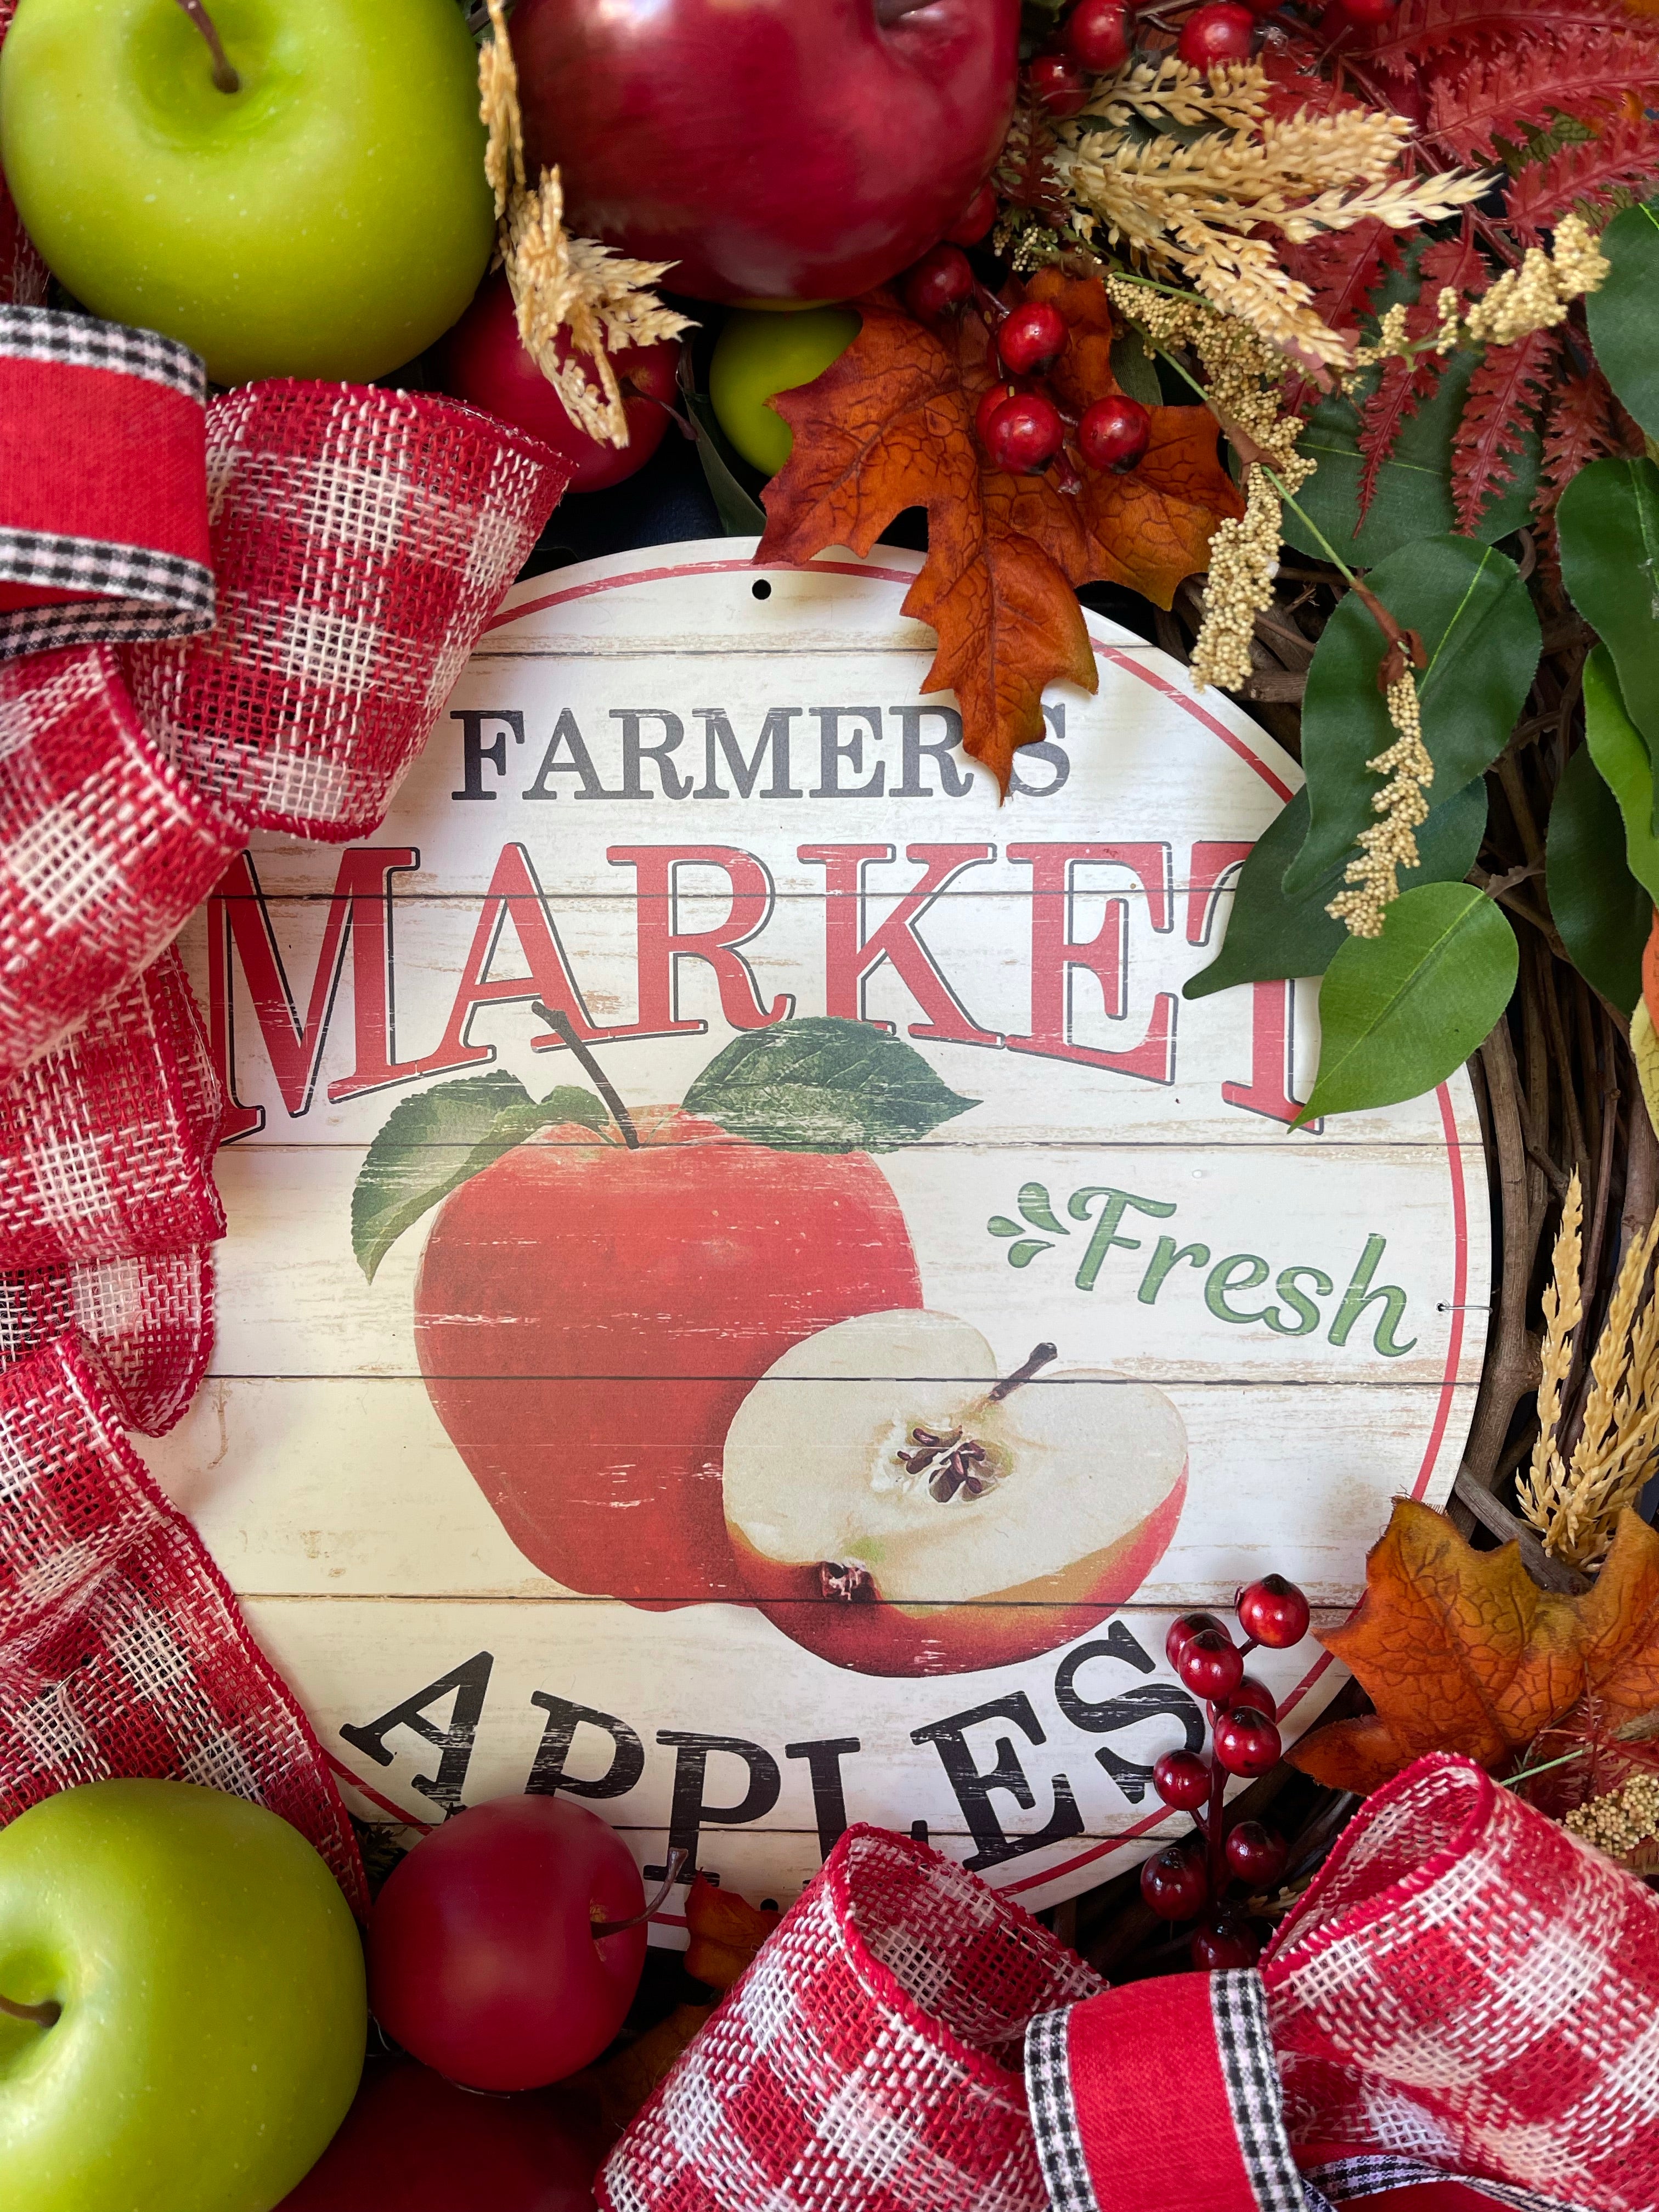 Close up on a Farmer's Market Fresh Apple Sign with a whole and sliced apple on the sign in red, black, white and green.